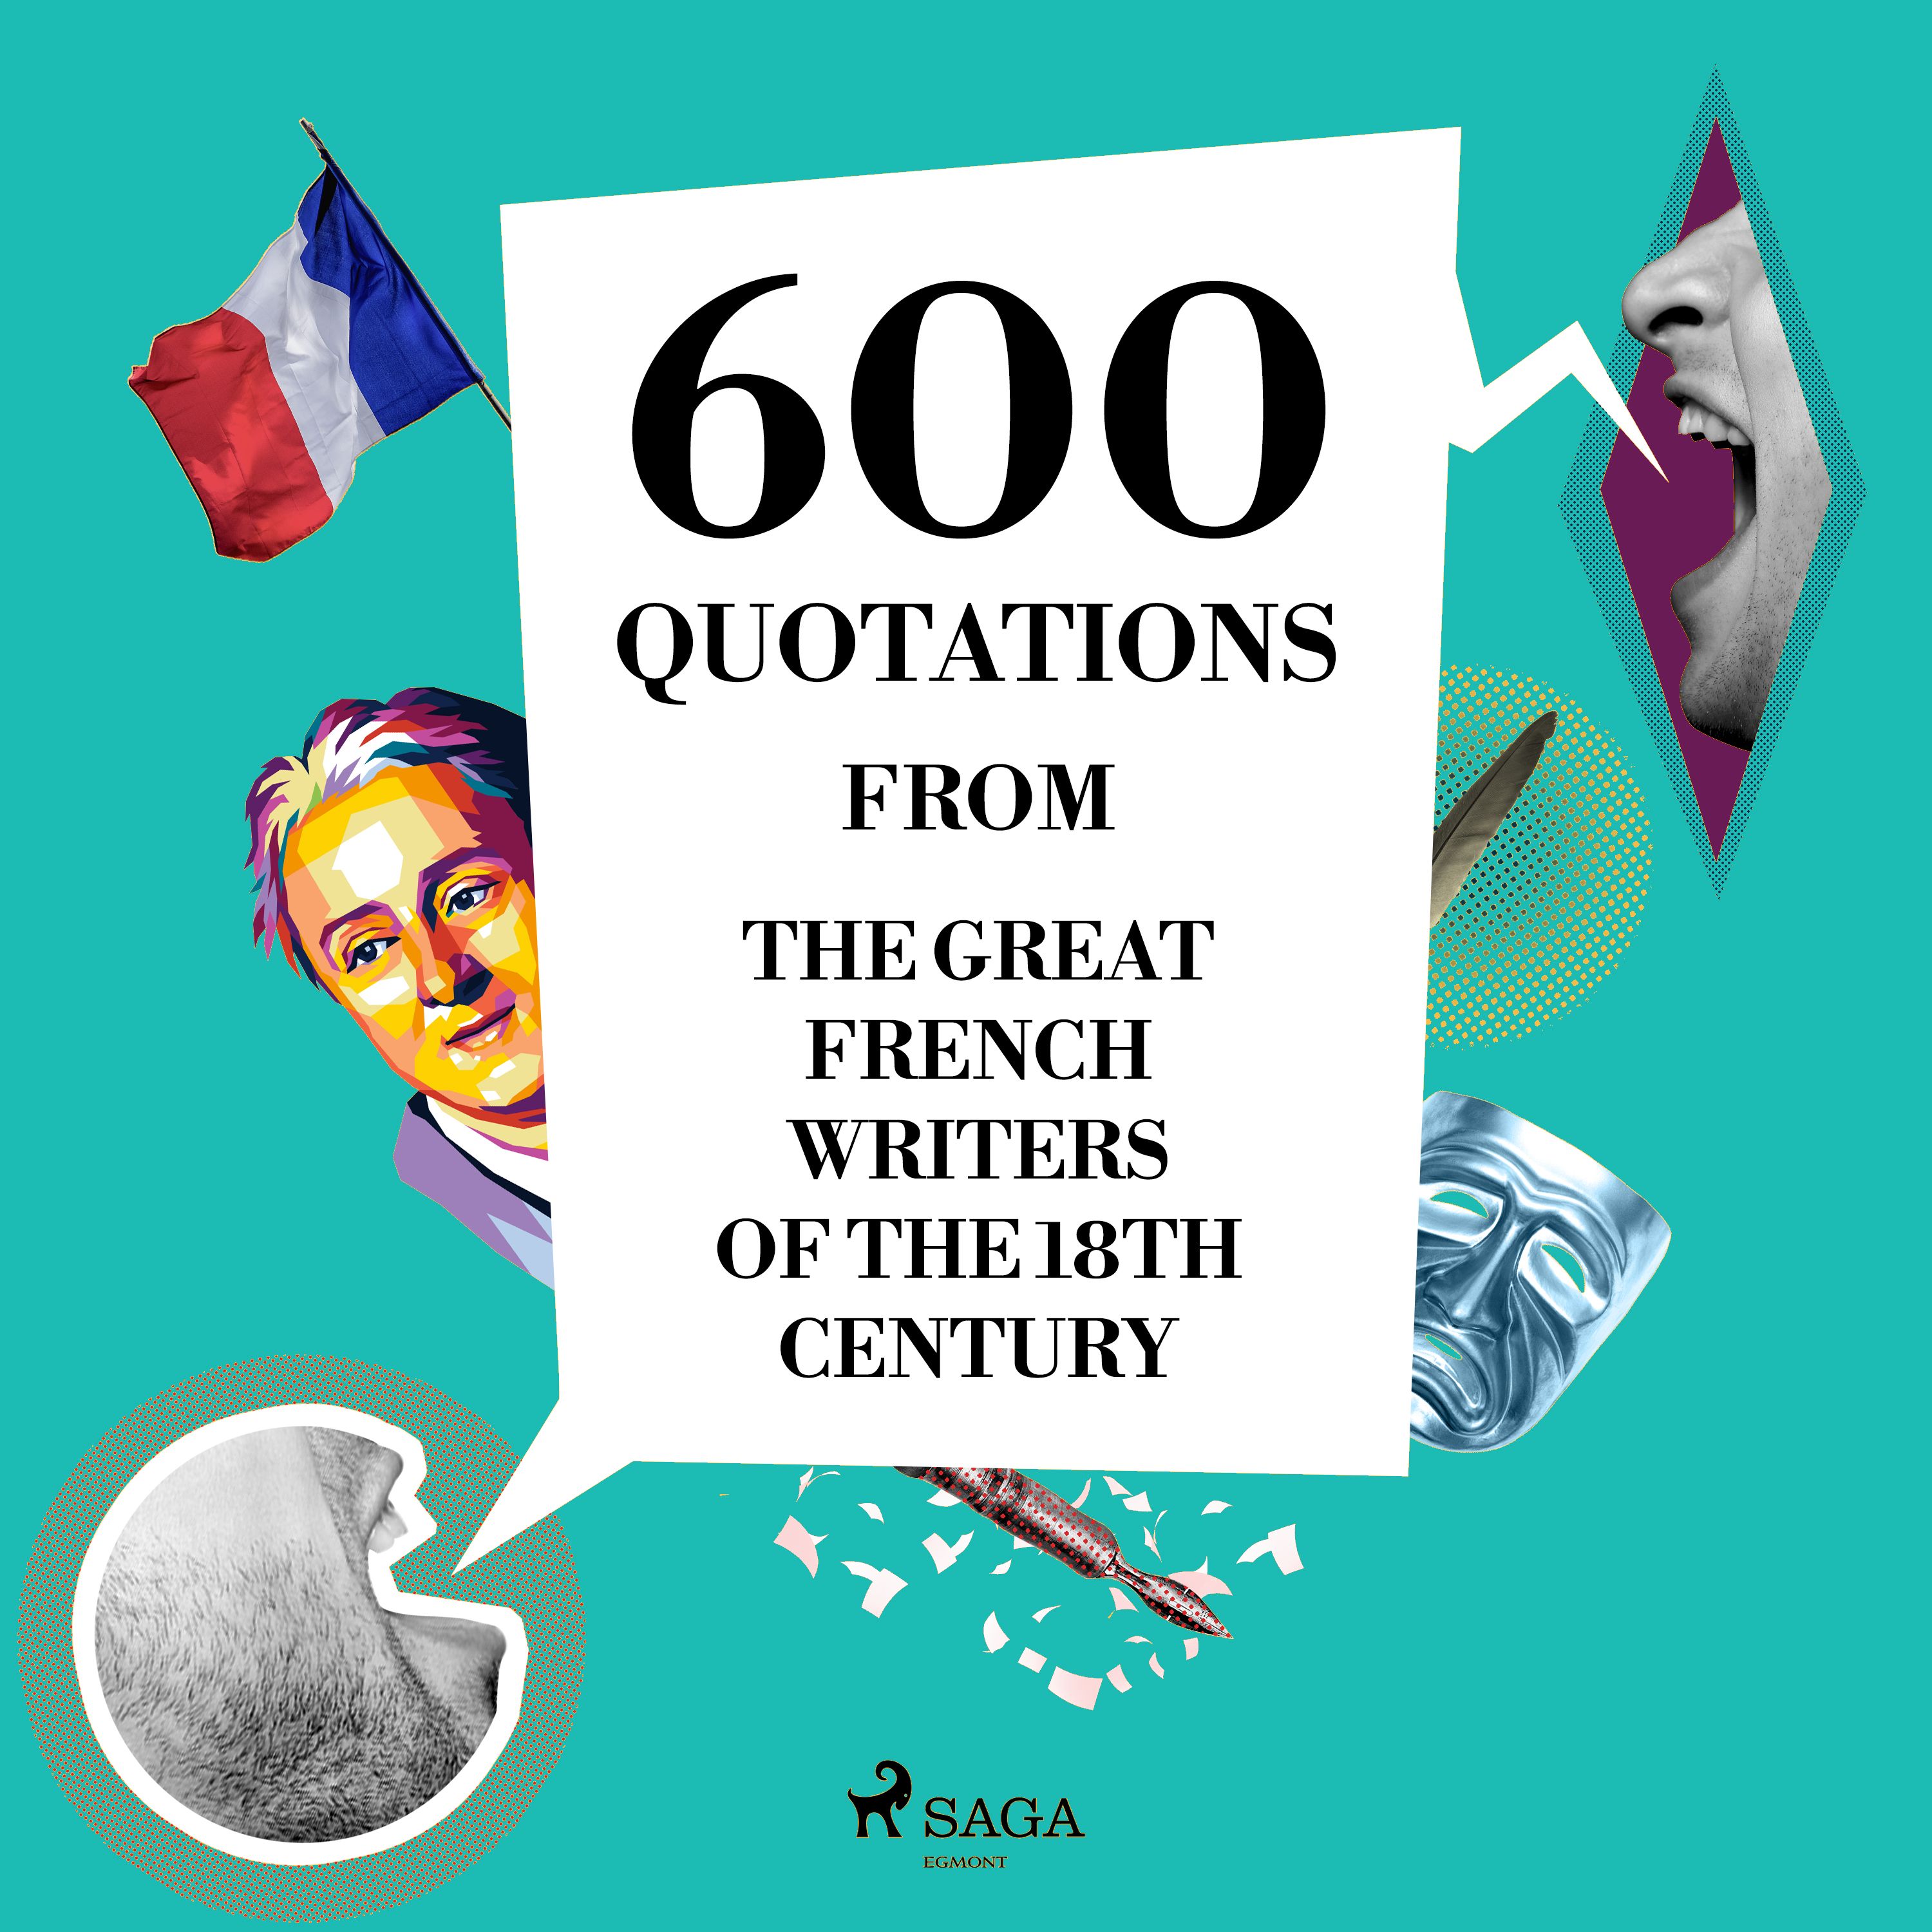 600 Quotations from the Great French Writers of the 18th Century, audiobook by Voltaire, Beaumarchais, Montesquieu, Nicolas de Chamfort, Denis Diderot, Jean-Jacques Rousseau